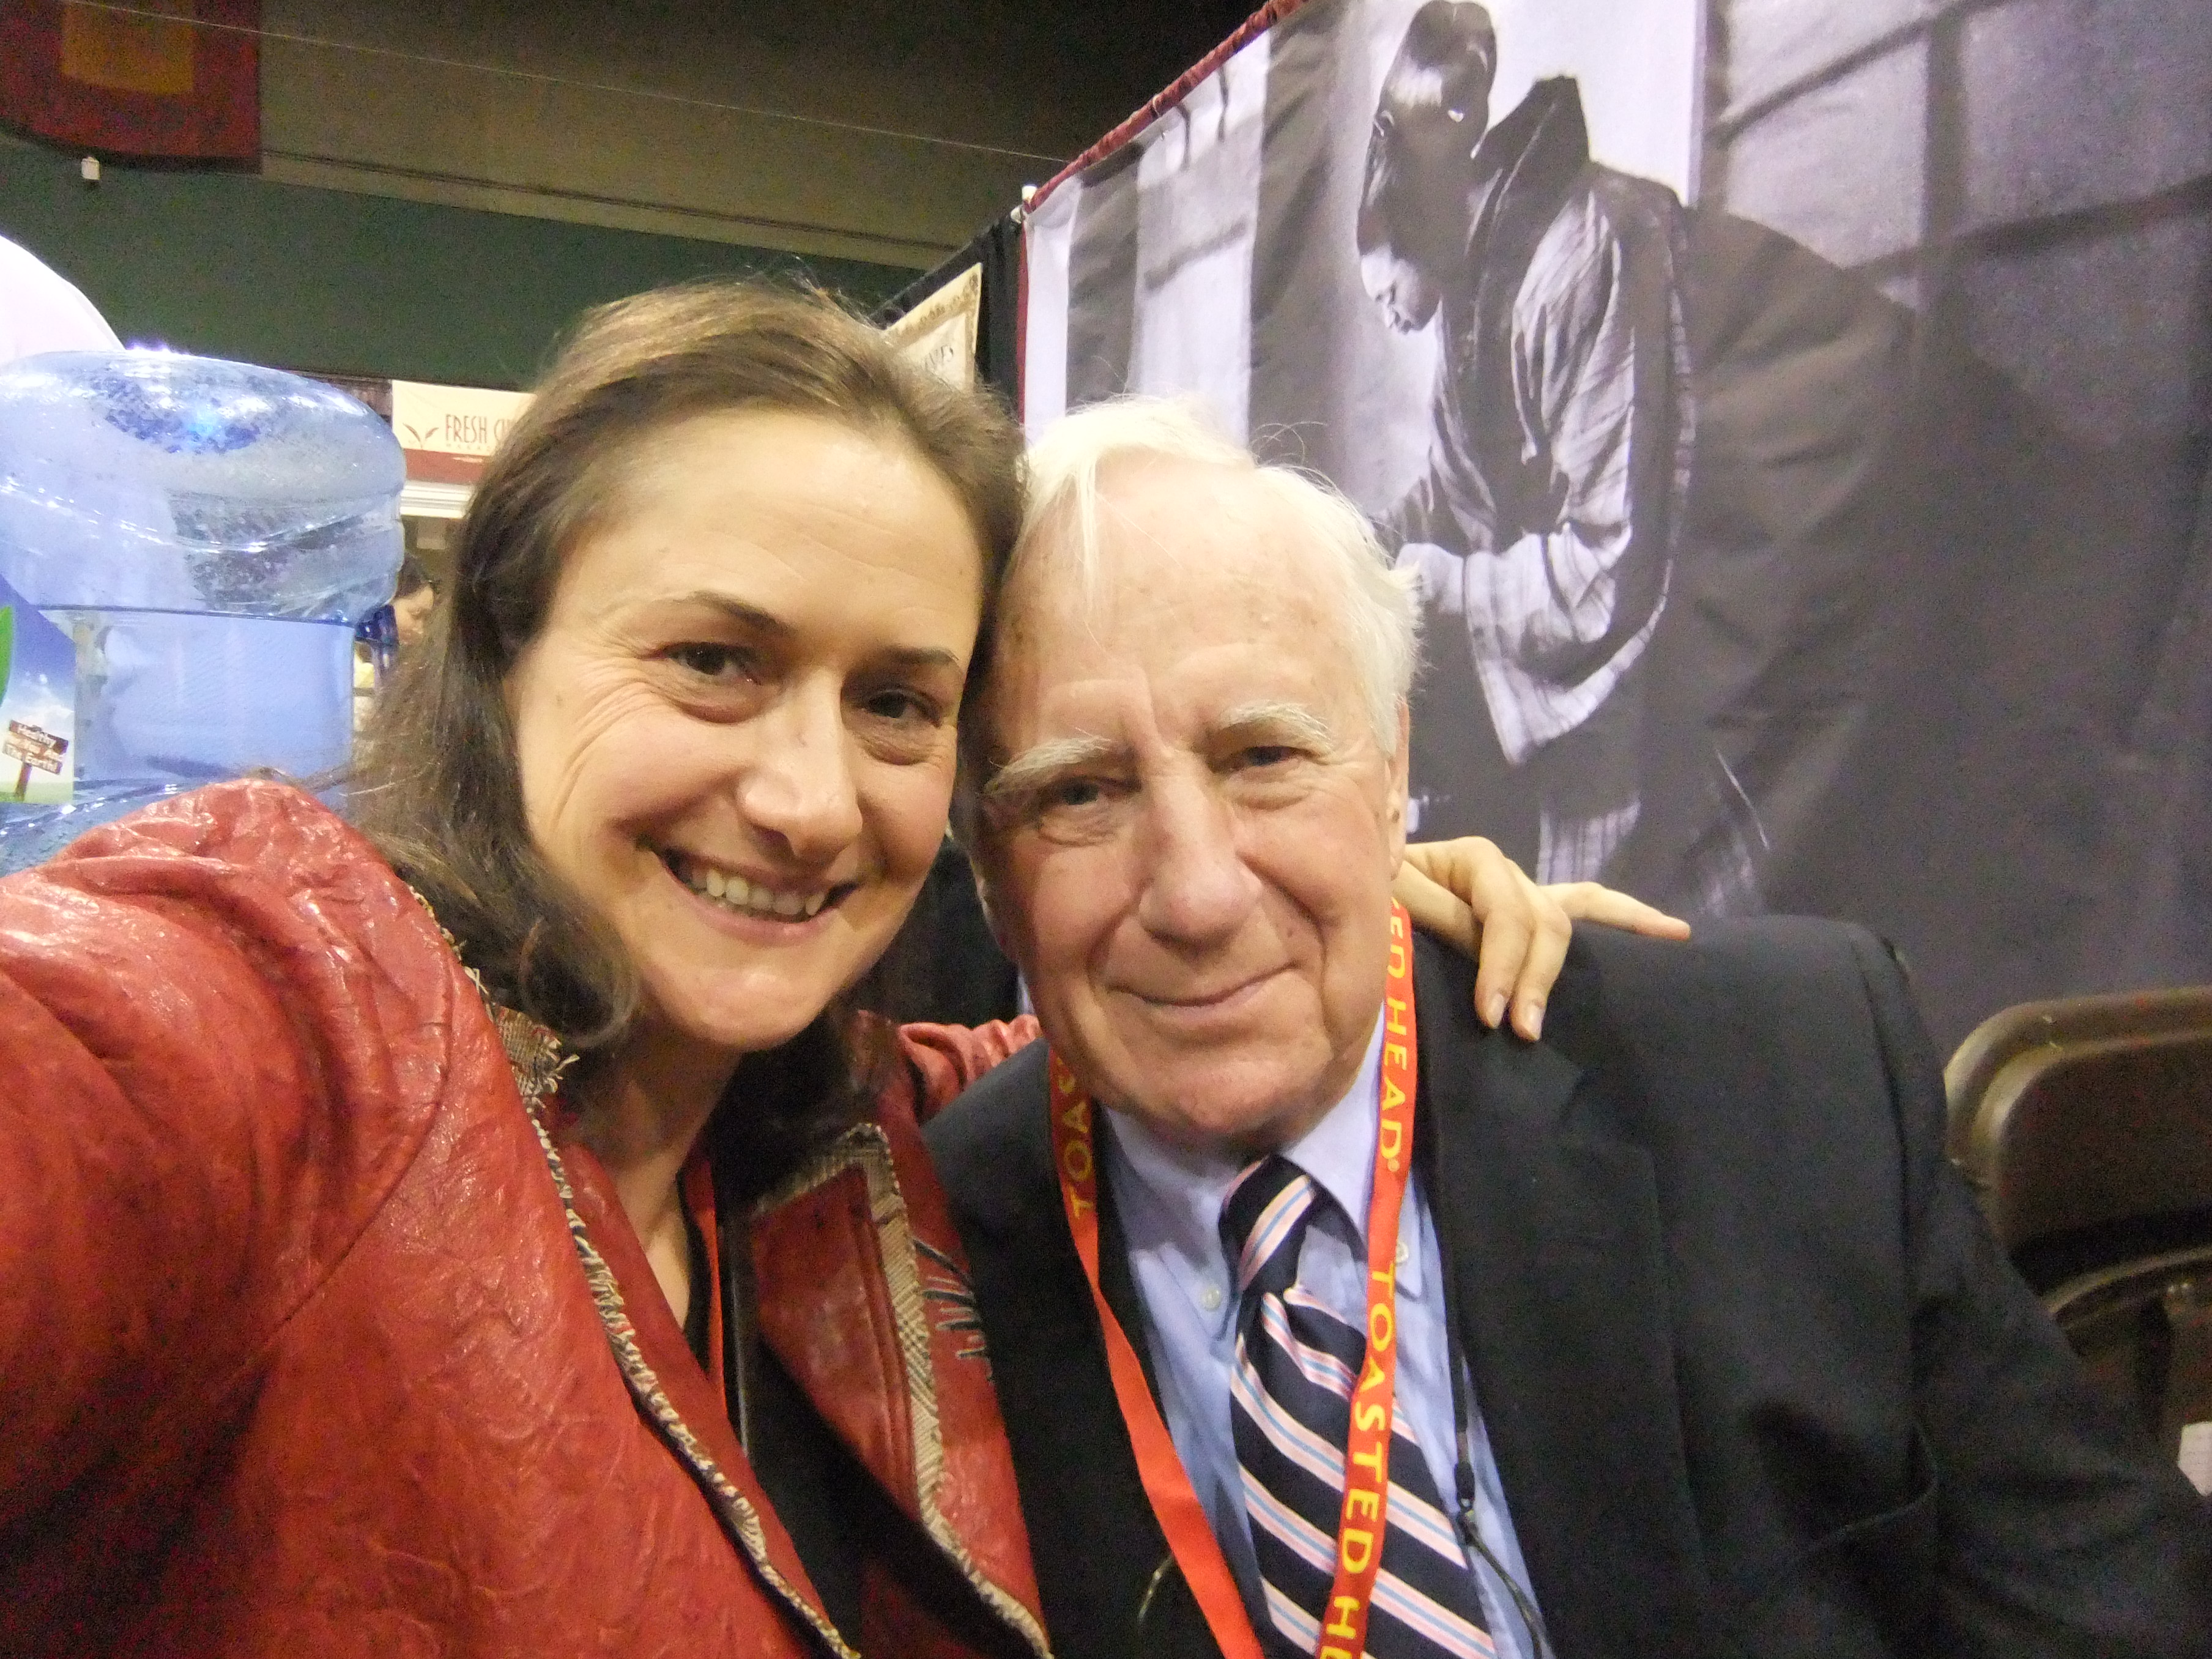 Effie Gidakos, our CEO, with John Harney, founder of Harney & Sons